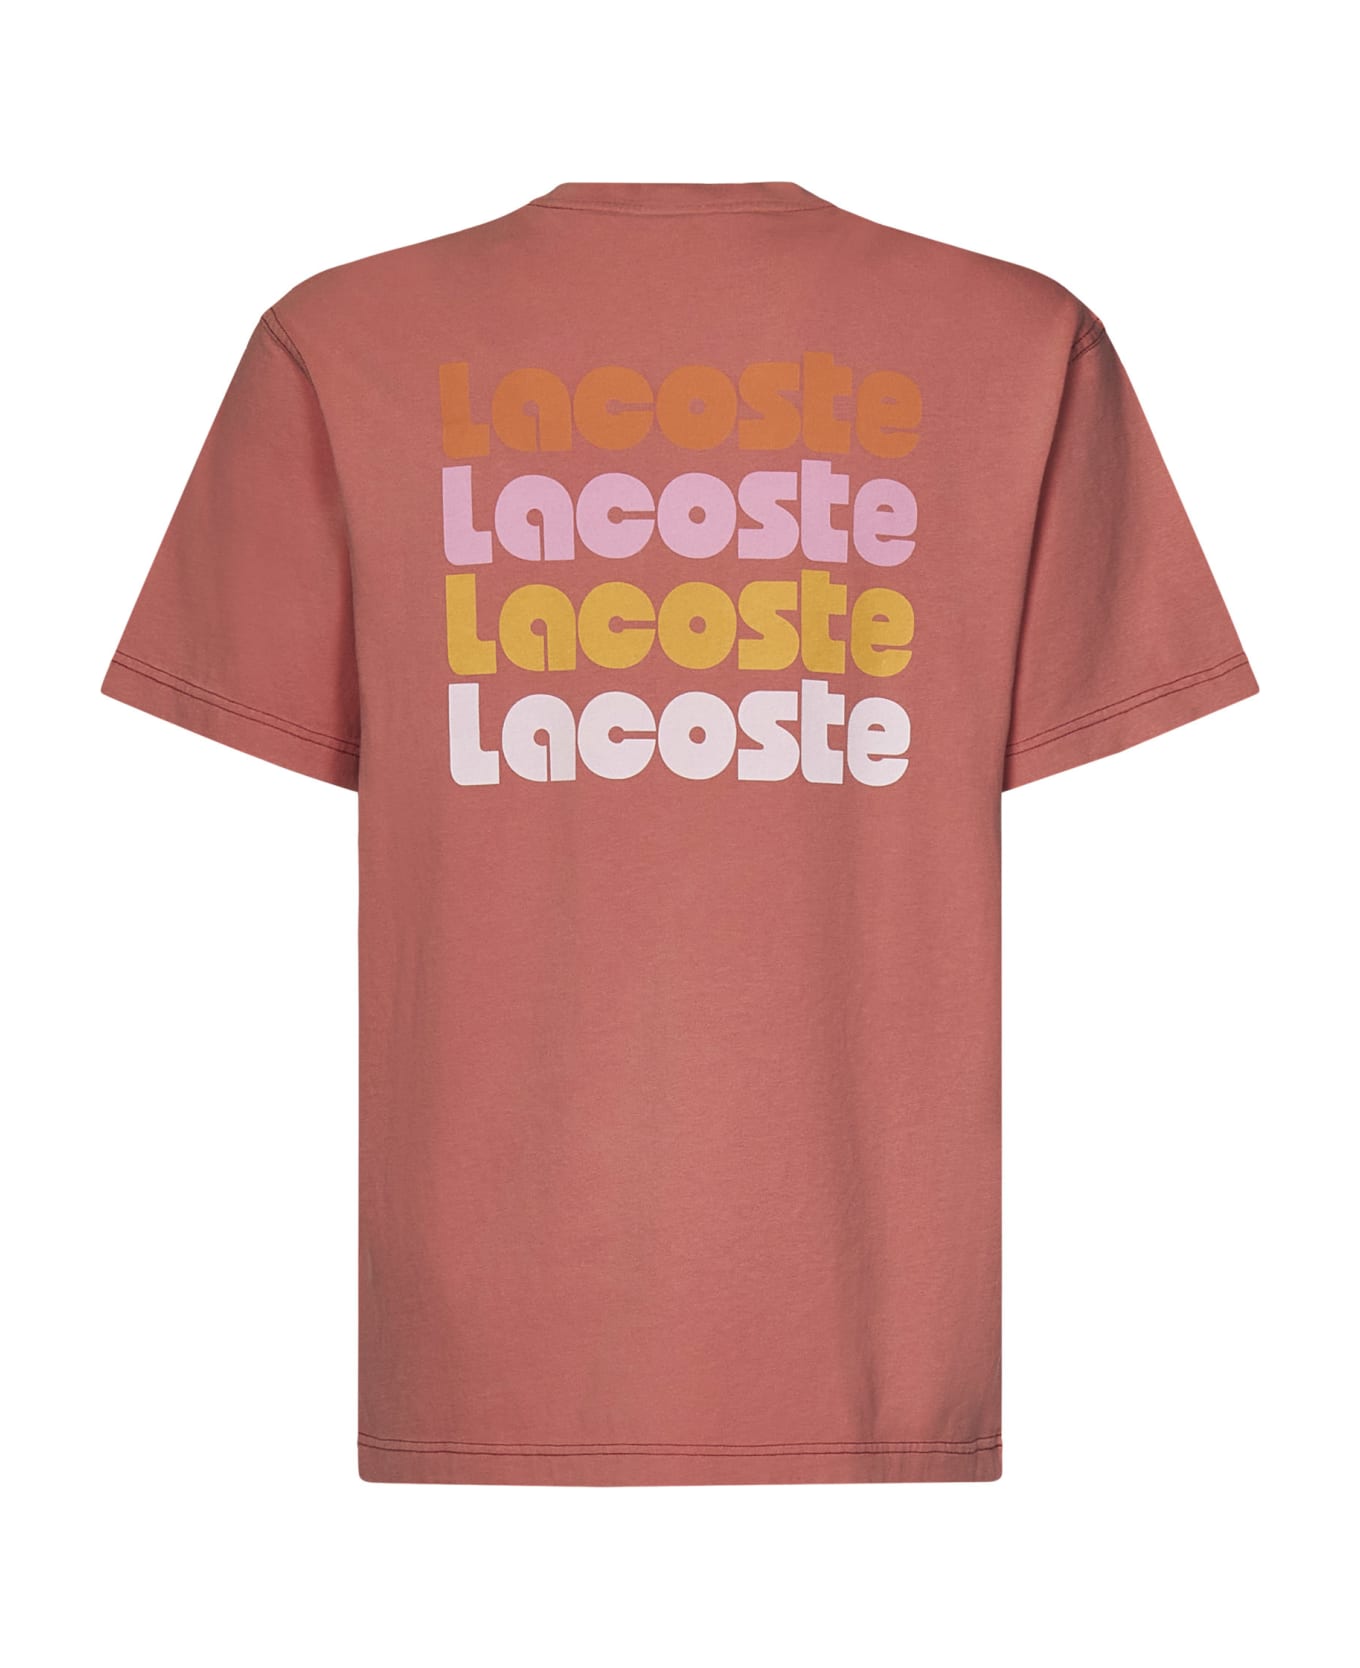 Lacoste T-shirt - Pink Tシャツ